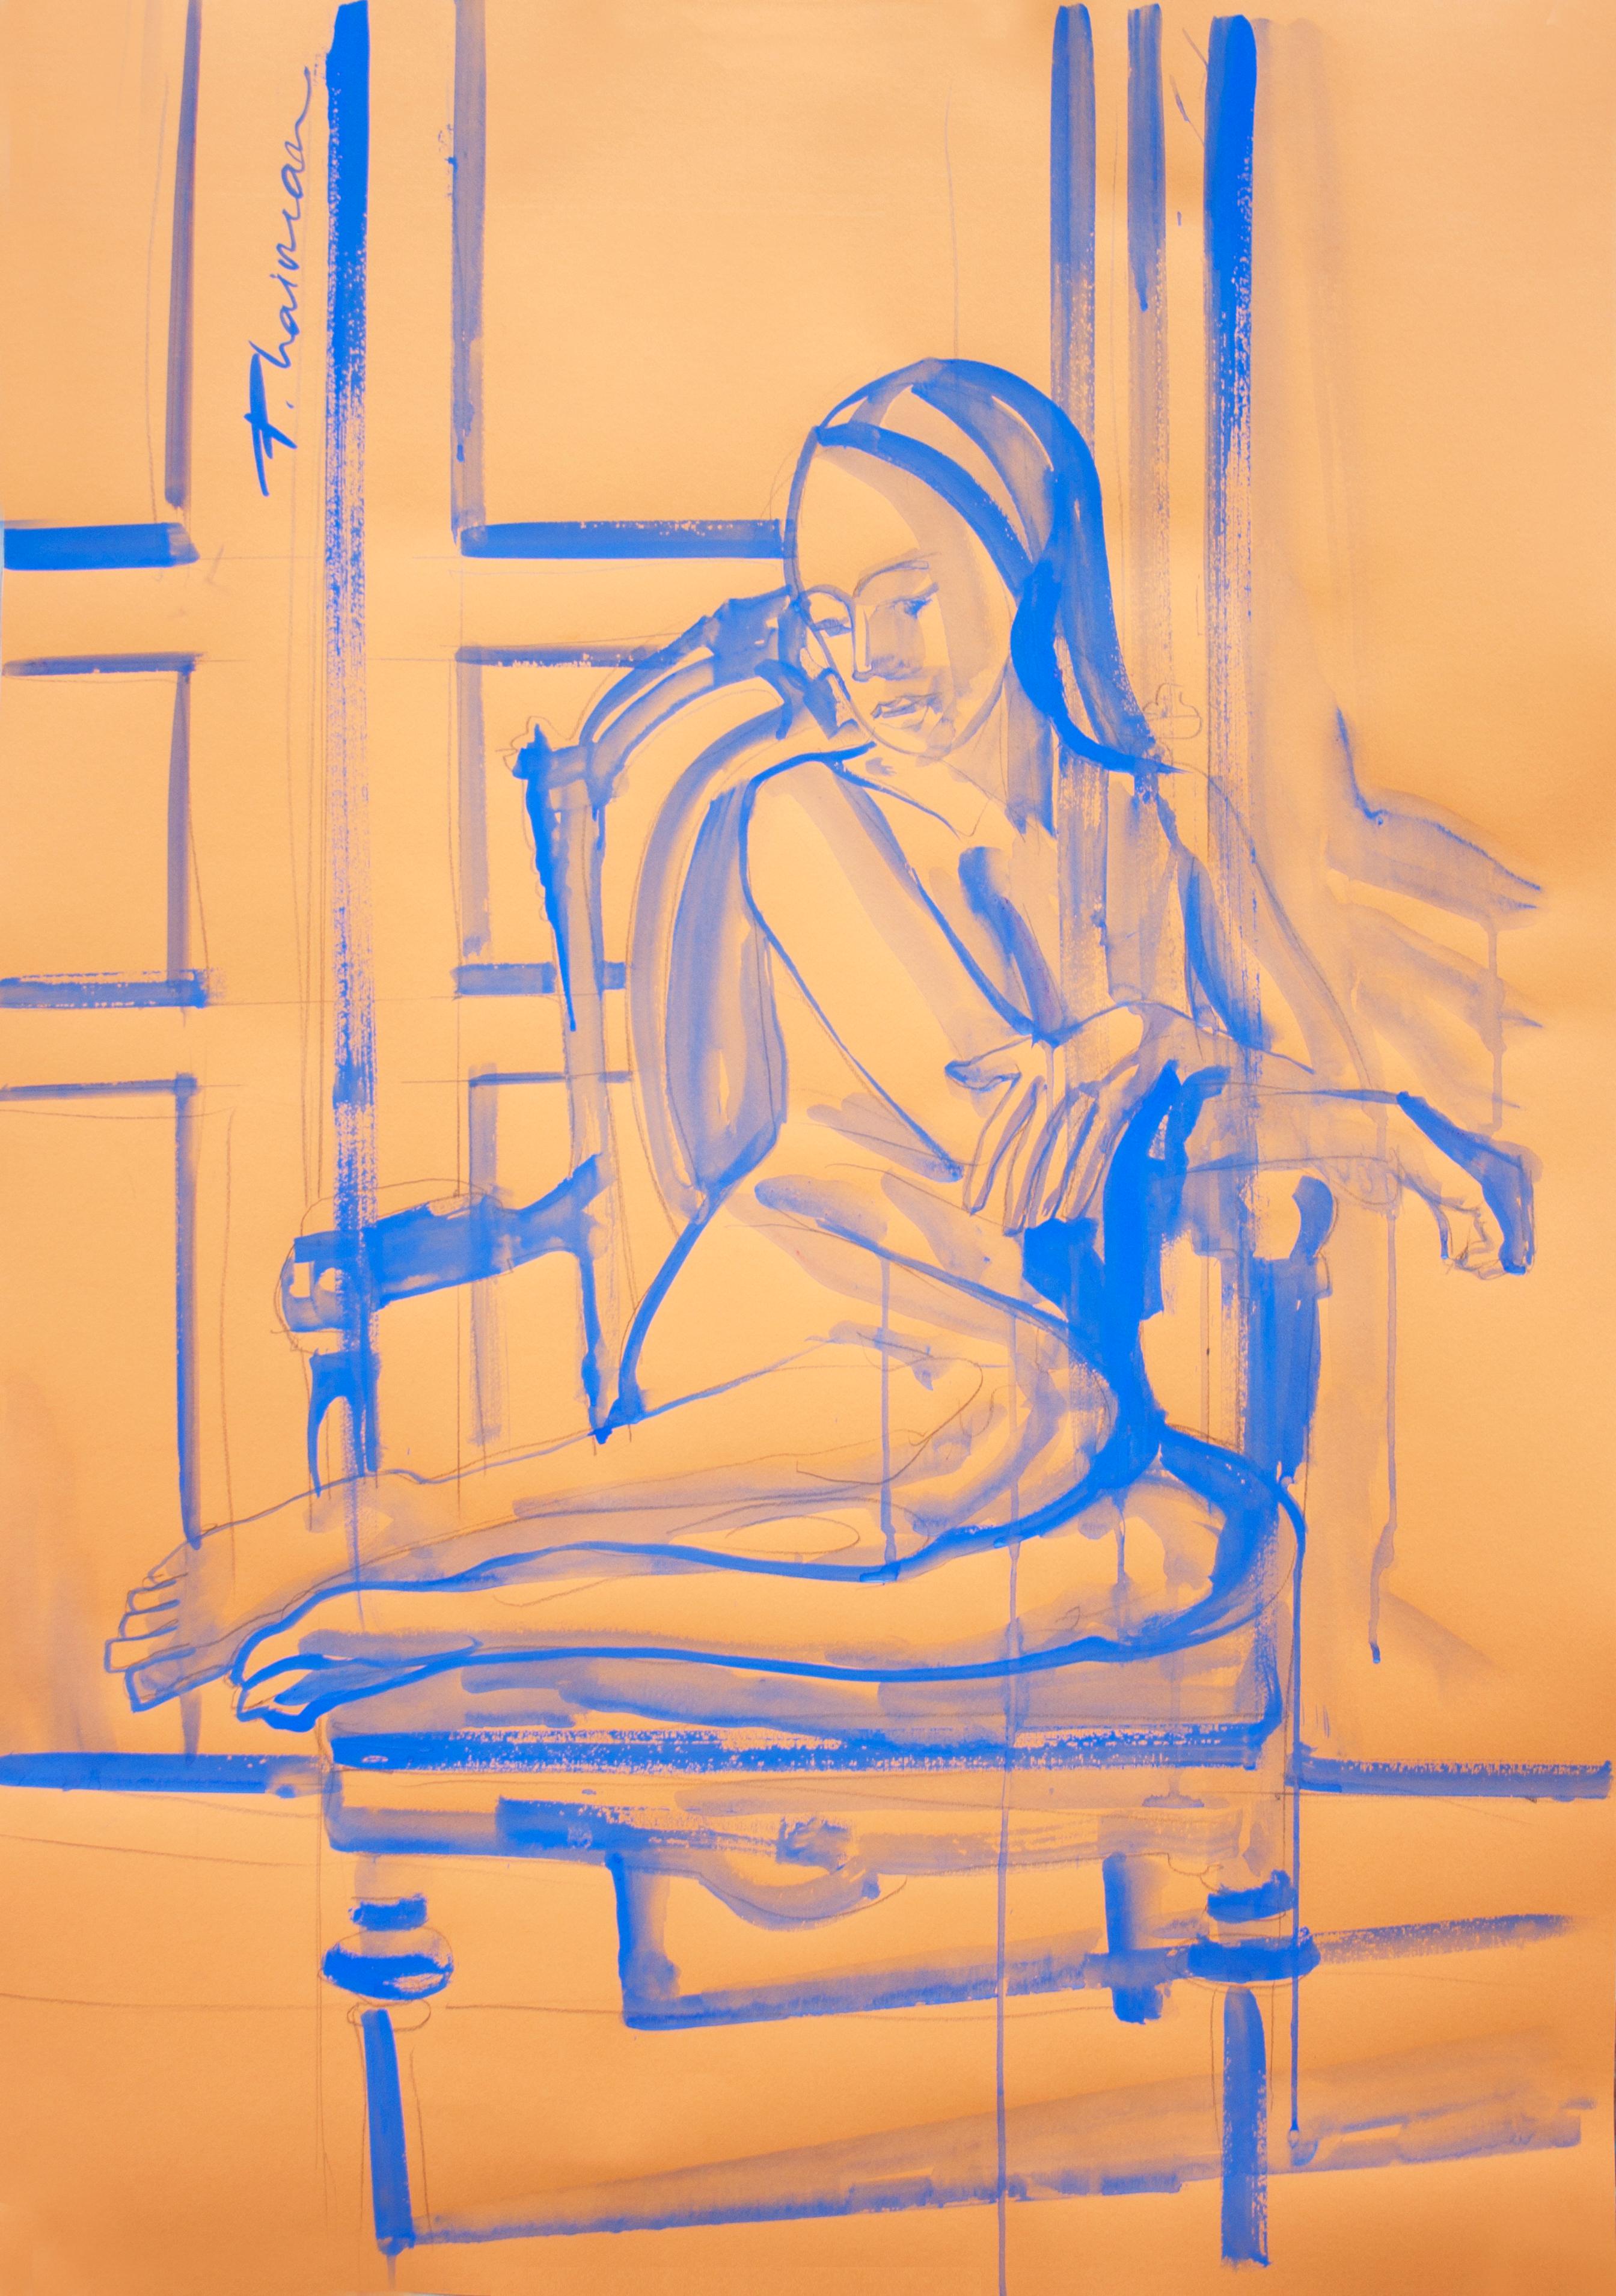 "Solitude", pencil and ultramarine tempera on paper, inspired by Matisse.
Part of Nude in Interior series.
Large drawing. Shipped rolled in a tube, directly from Florida, US.
39x27.5in / 100x70cm

Artist Statement
"I started by painting interiors,